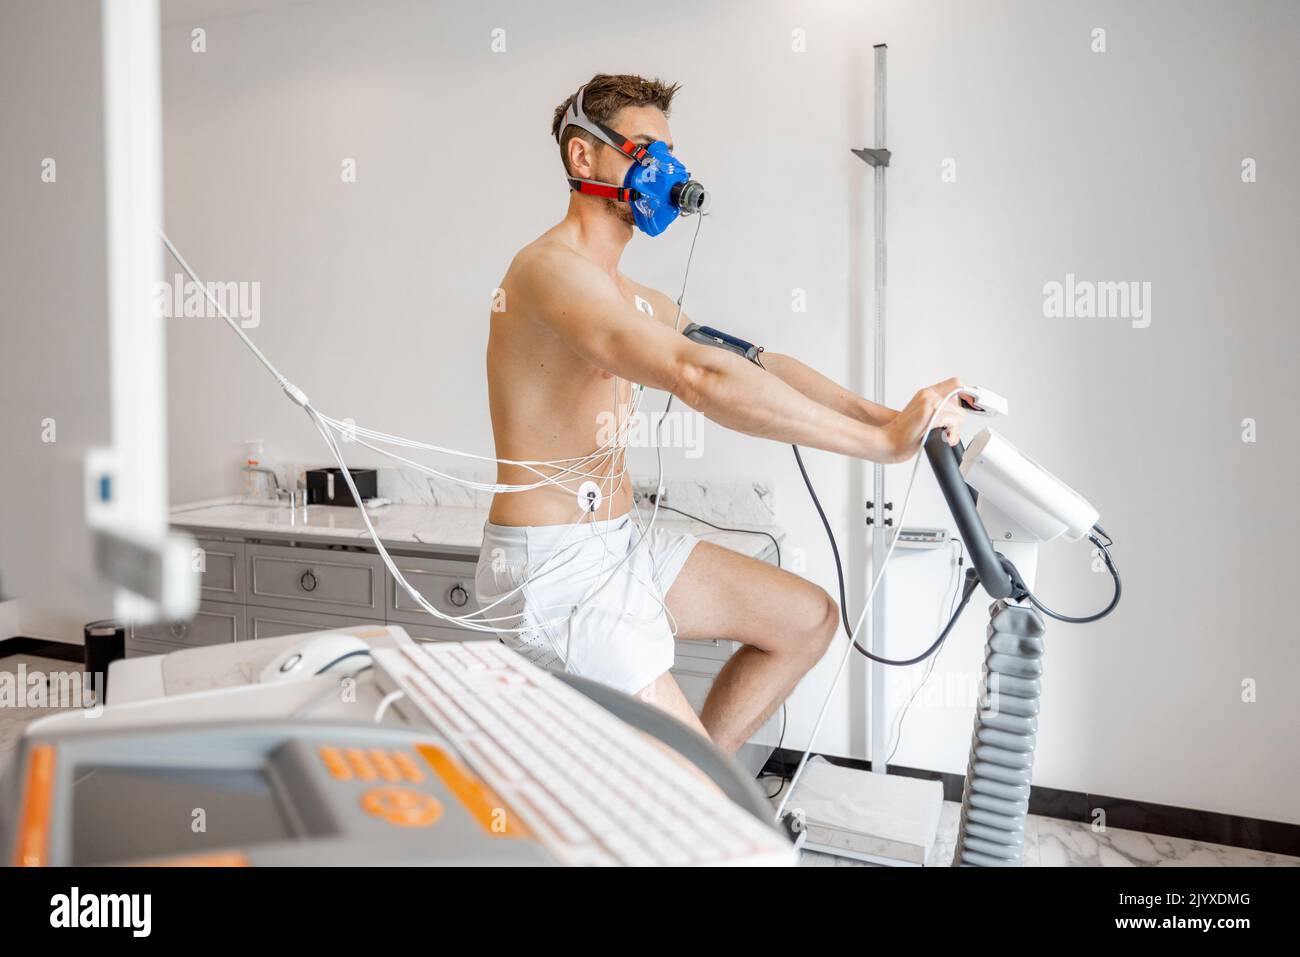 Man athlete with breath mask and electrodes training on bike simulator, examining his cardiovascular system at medical office Stock Photo